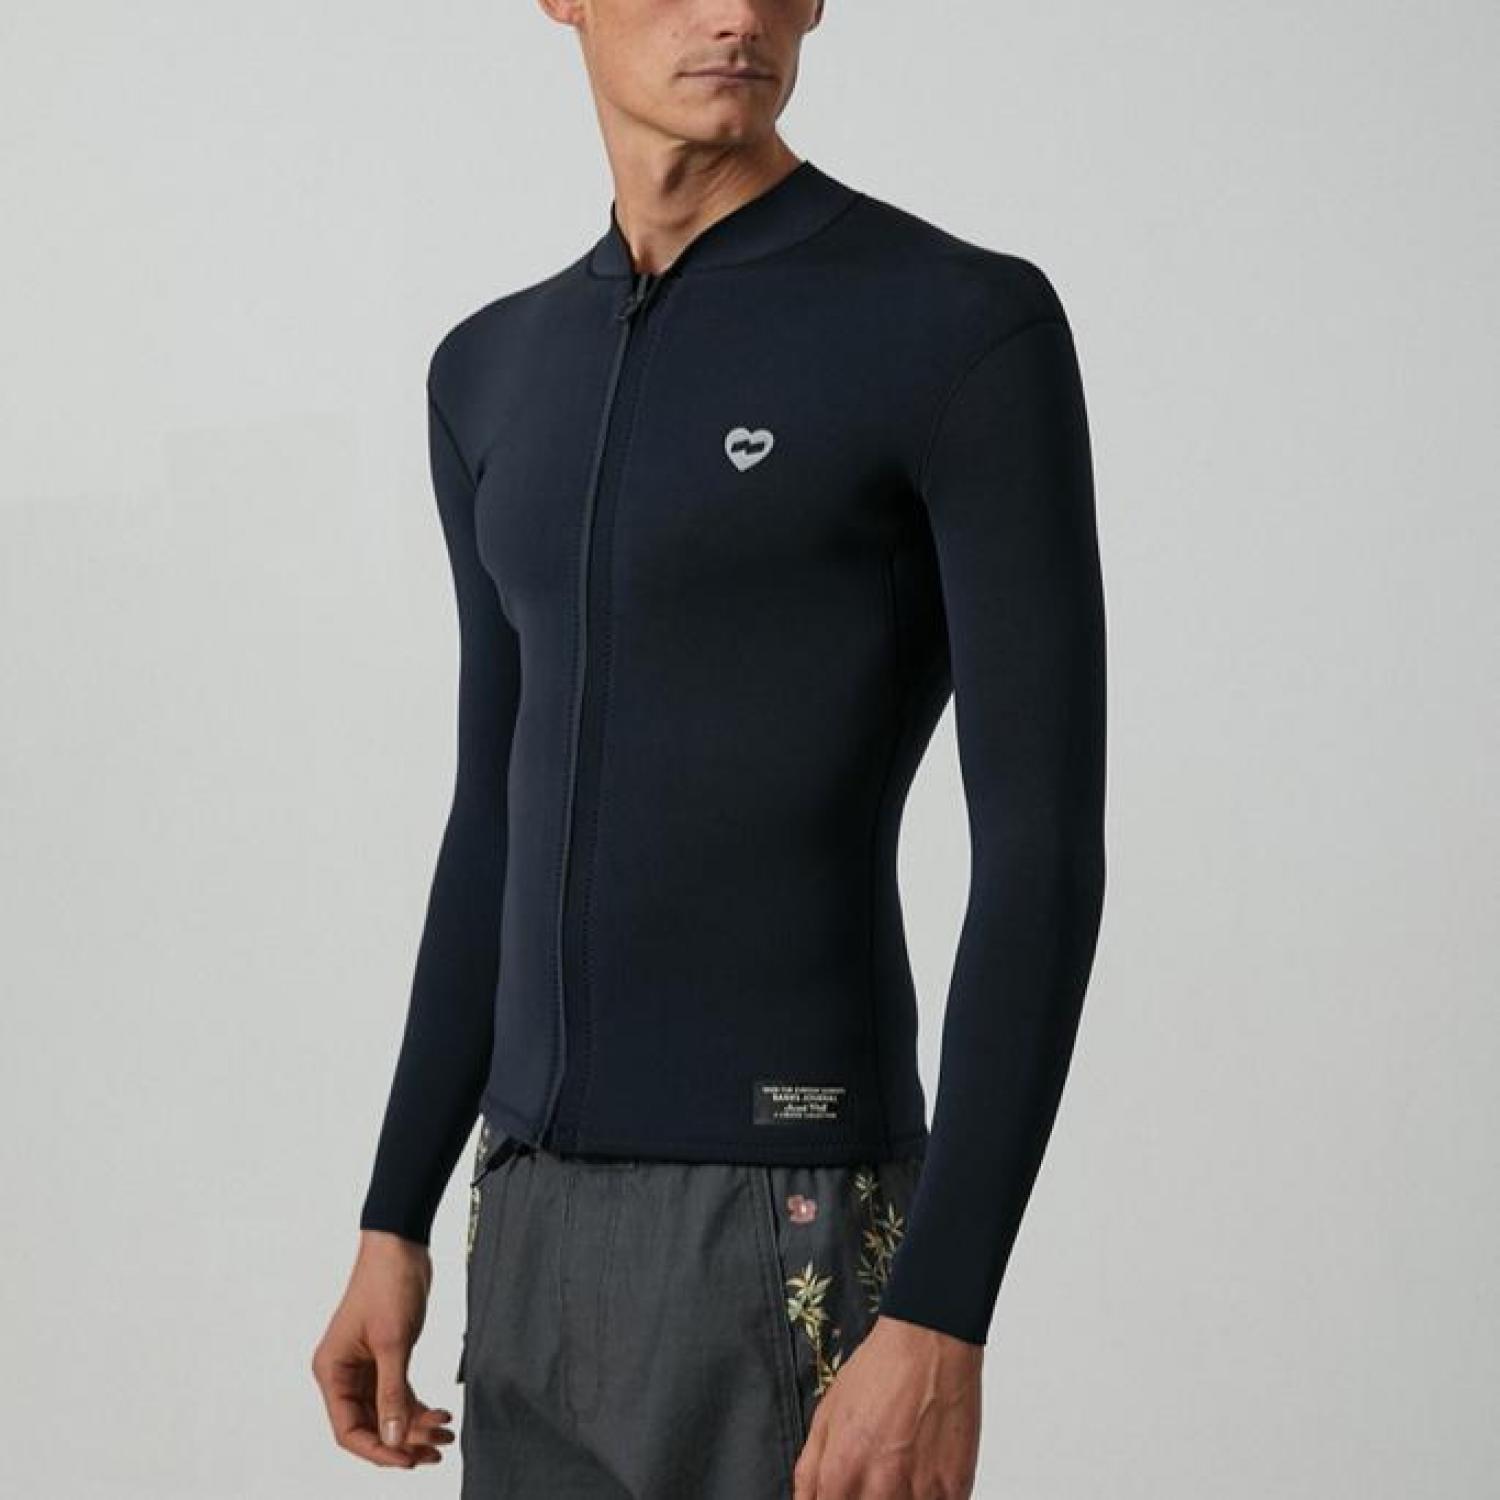 BANKS JARED MELL FRONT ZIP WETSUIT